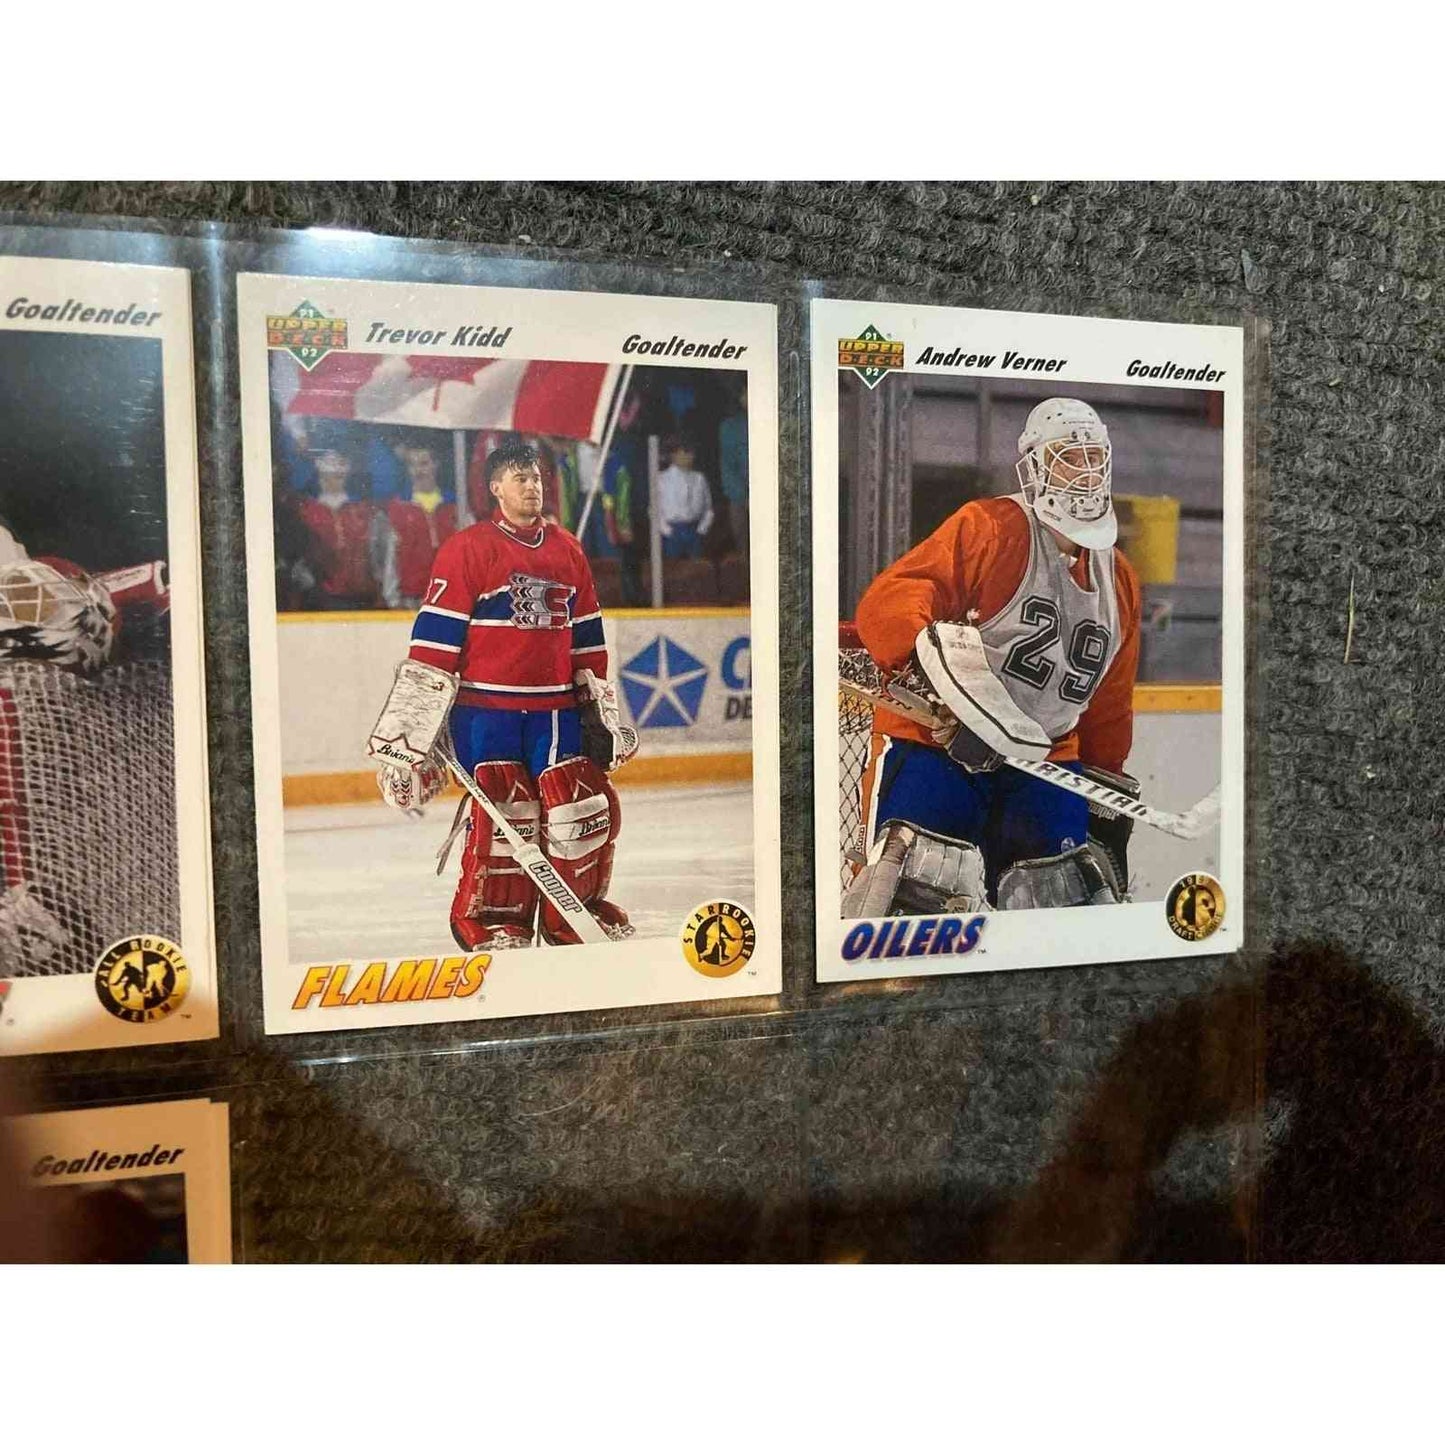 Hockey Cards: Upper Deck [1991 - 200+ CARDS!] BooksCardsNBikes